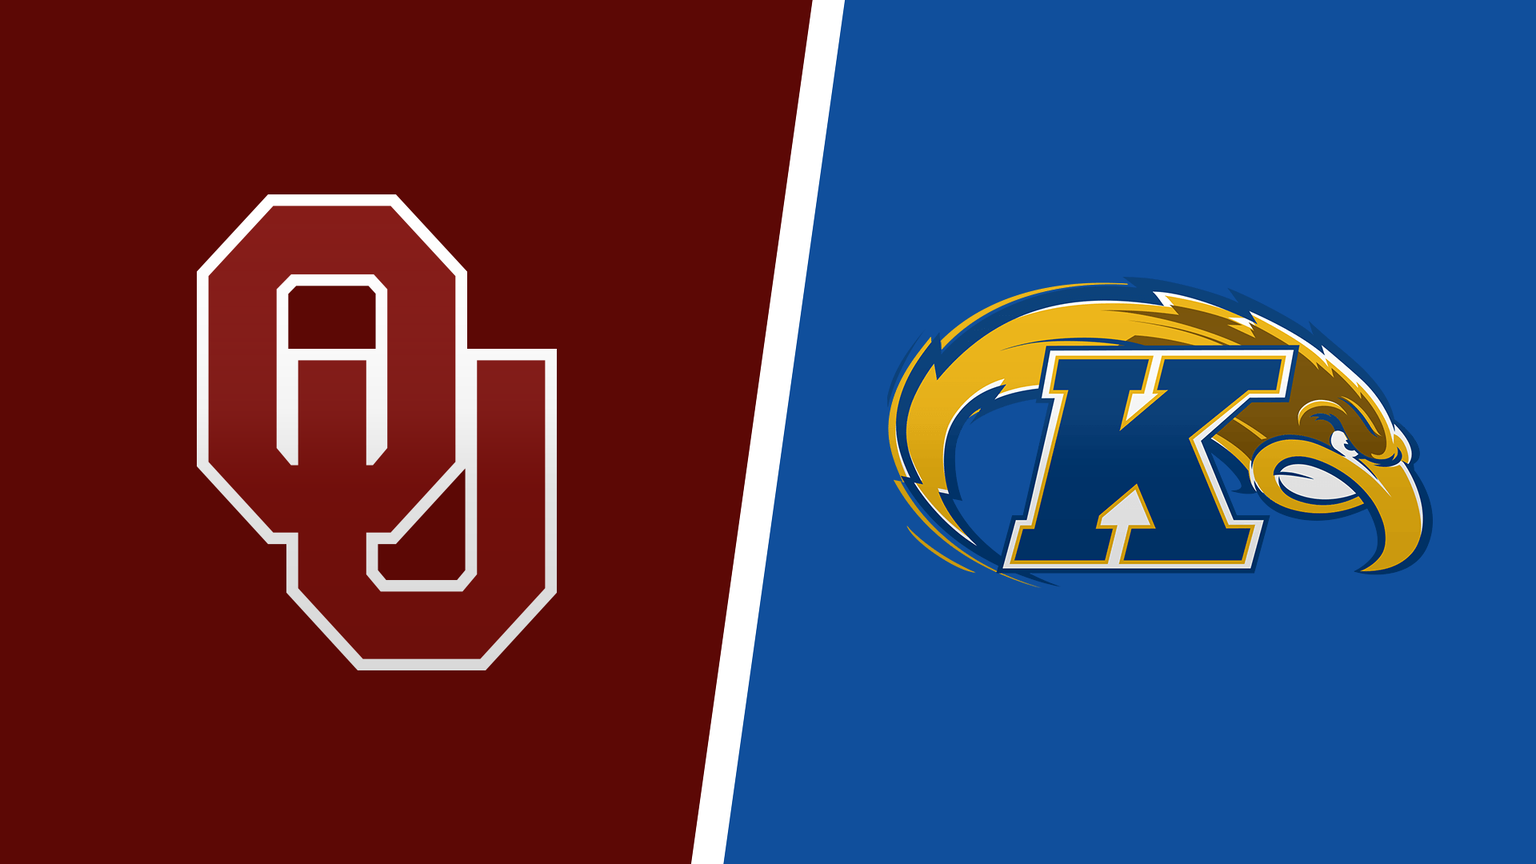 How to Watch Kent State vs. Oklahoma Live Online on September 10, 2022